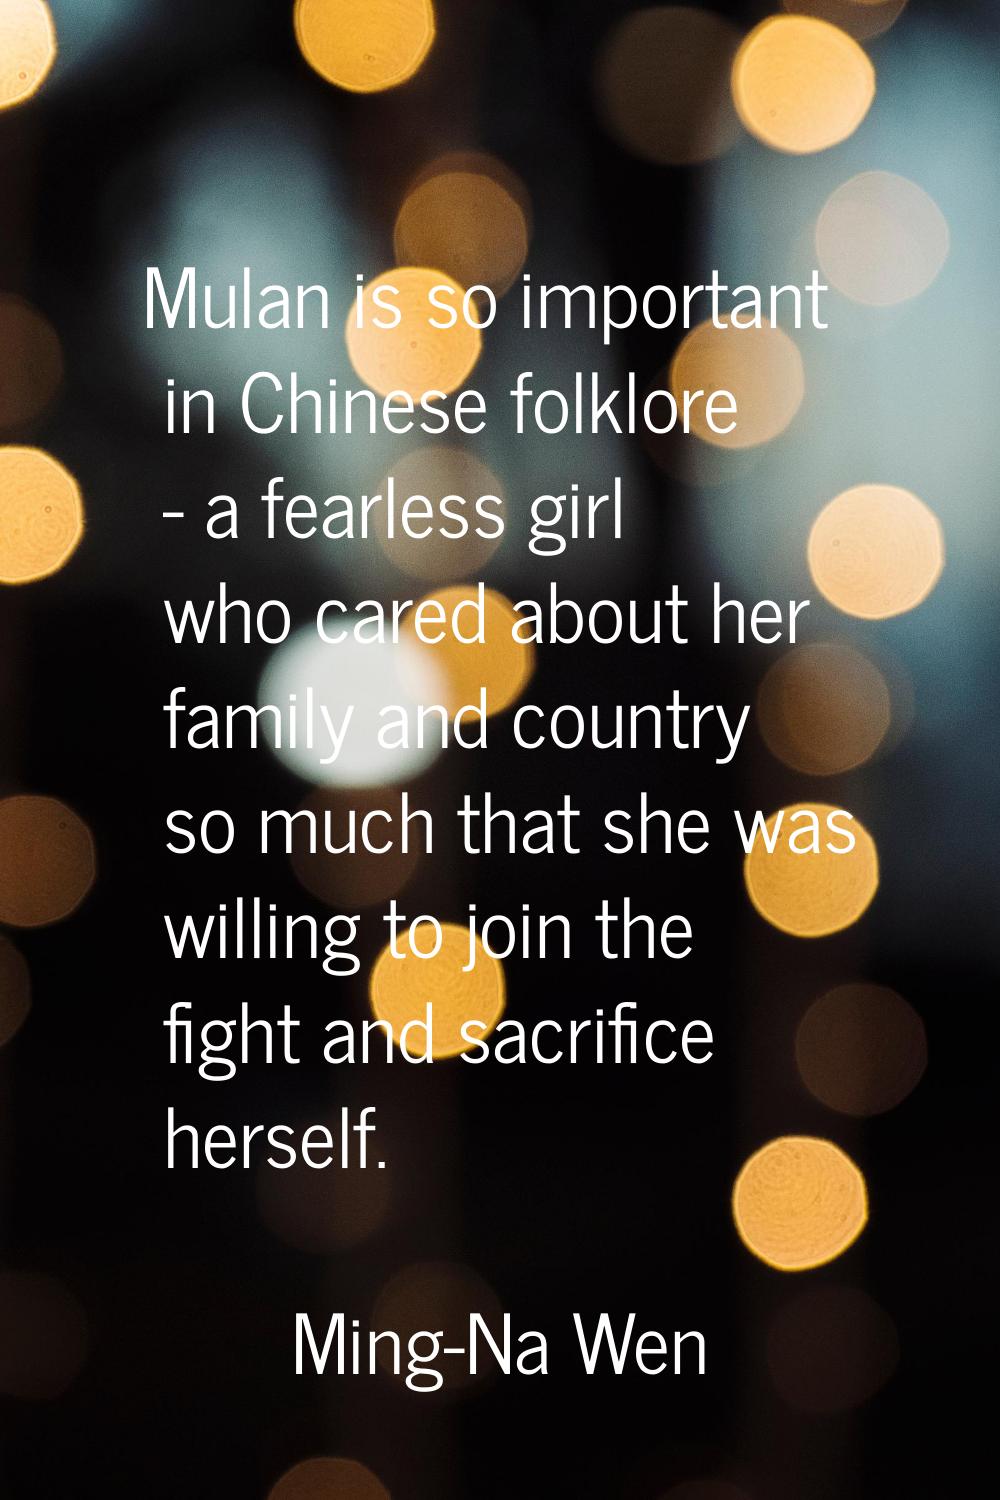 Mulan is so important in Chinese folklore - a fearless girl who cared about her family and country 